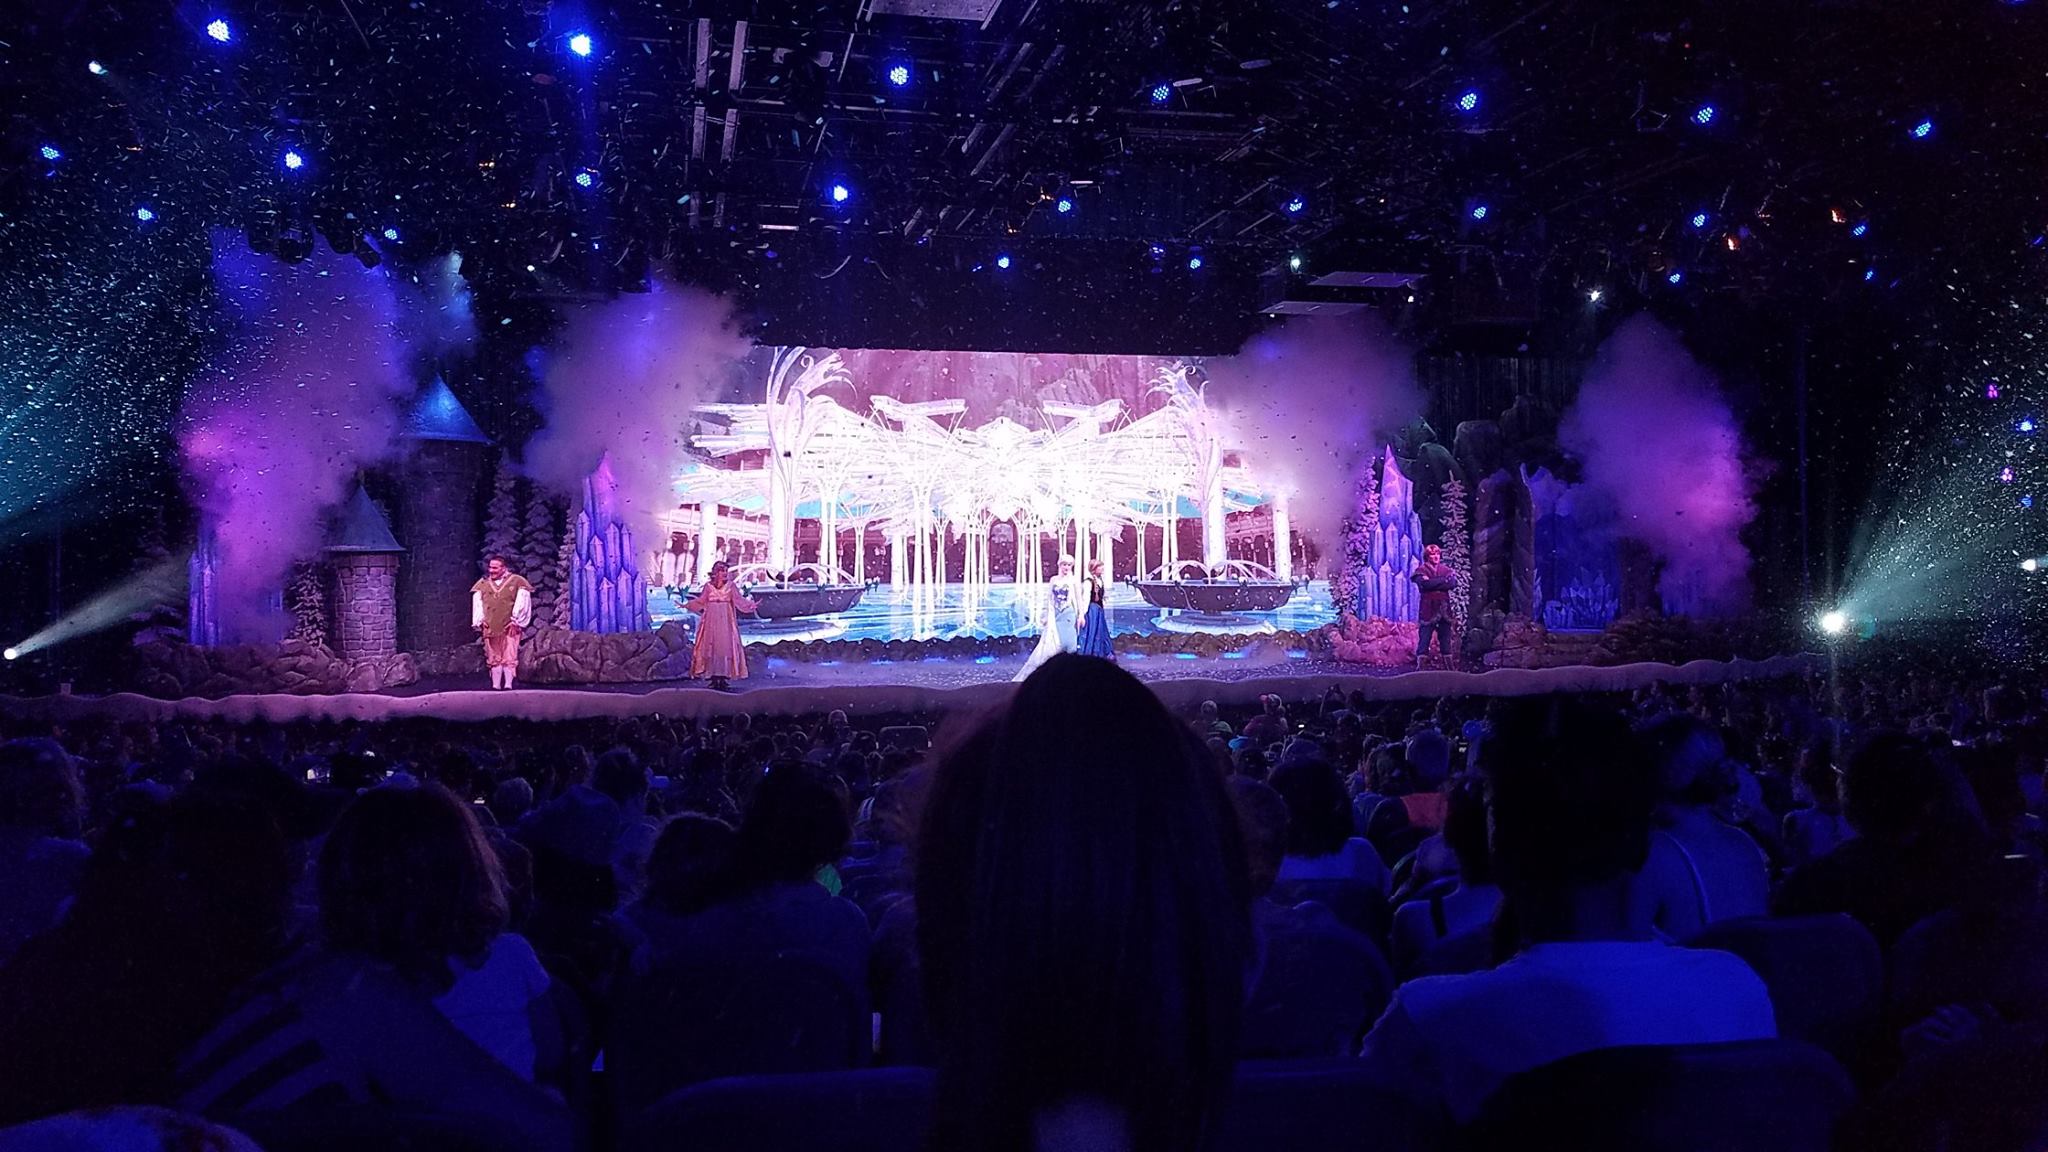 Anna, Elsa, and Kristoff in For the First Time in Forever A Frozen Sing Along Celebration